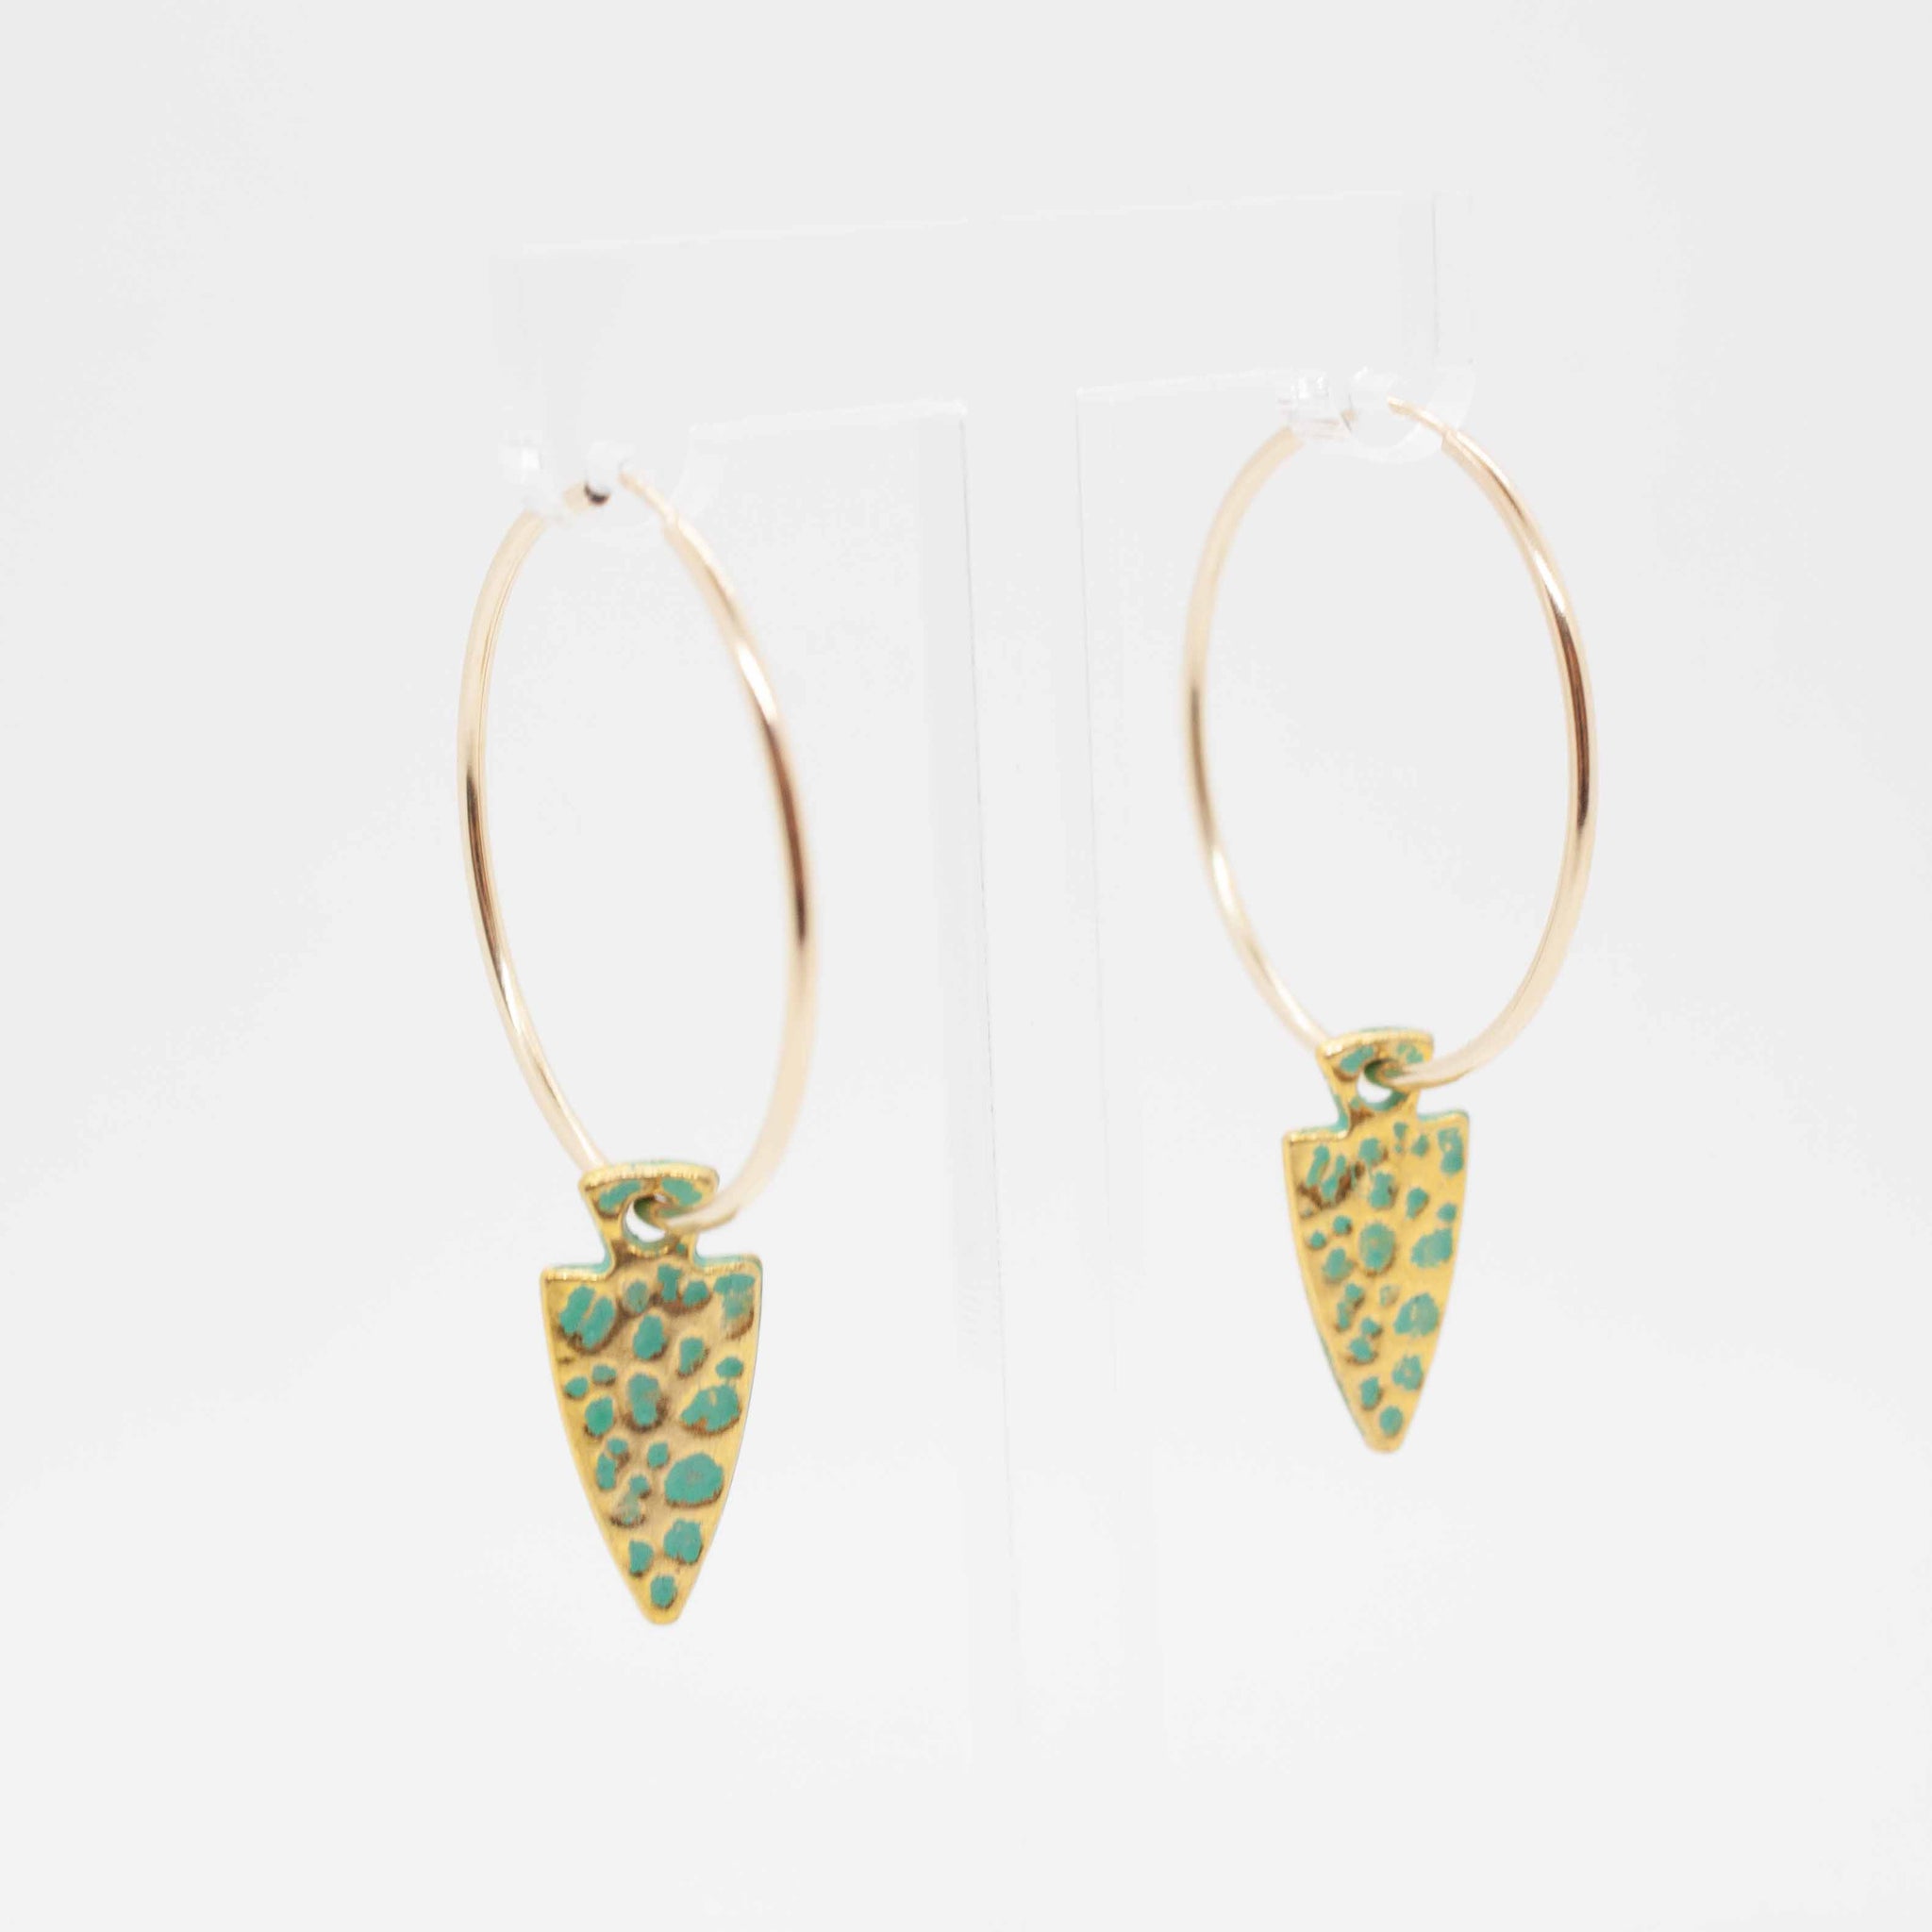 Get ready for battle in these turquoise and gold beauties! 40mm gold filled hoop earrings with vintage arrow head charms. Made in Toronto kp jewelry co.